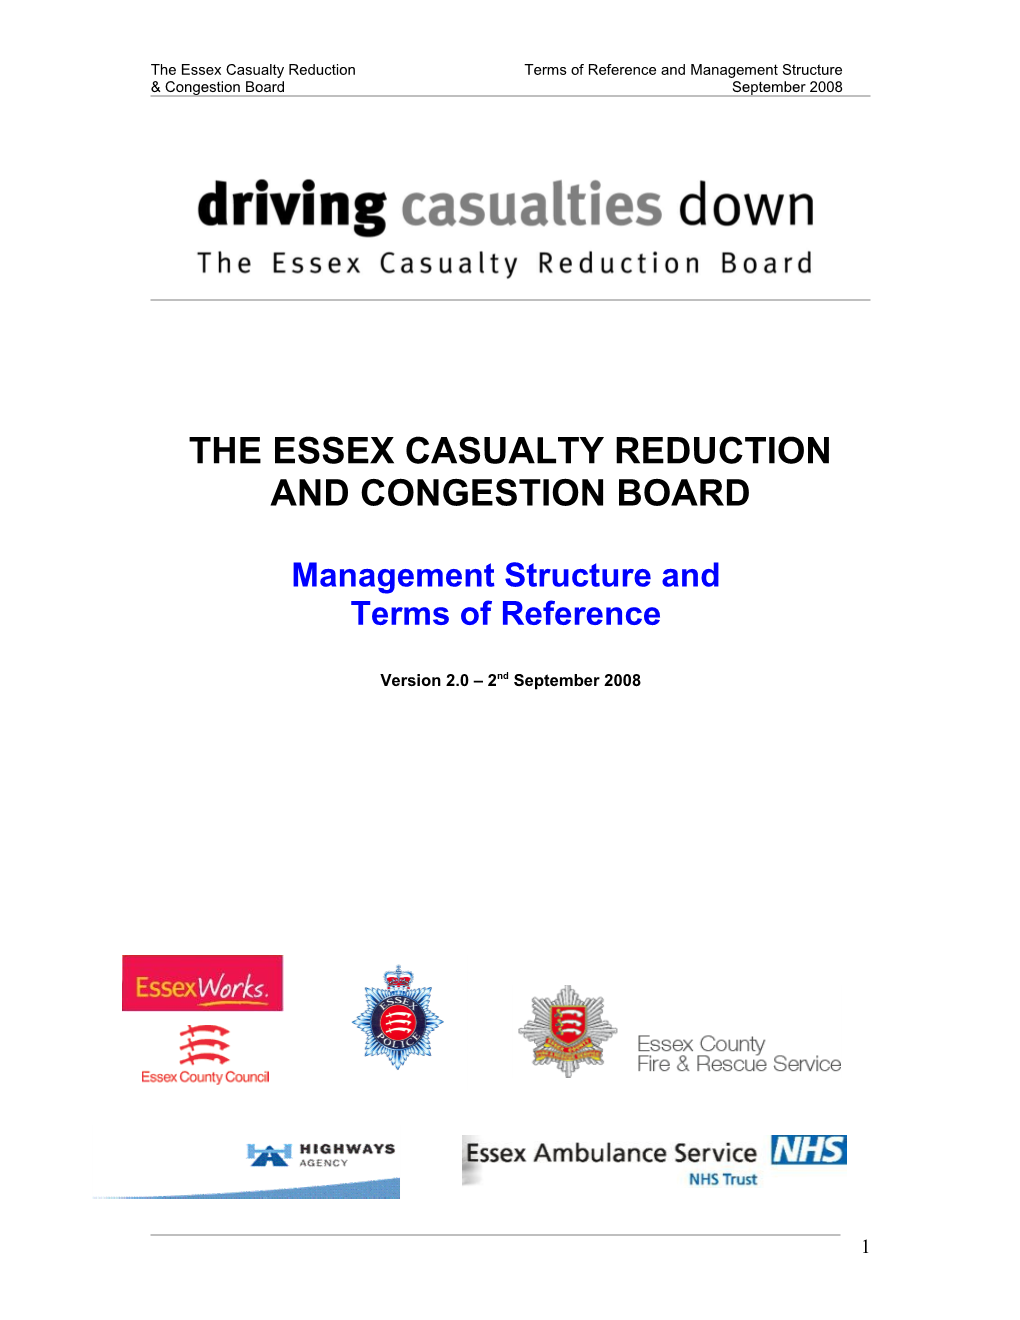 Casualty Reduction and Congestion Board